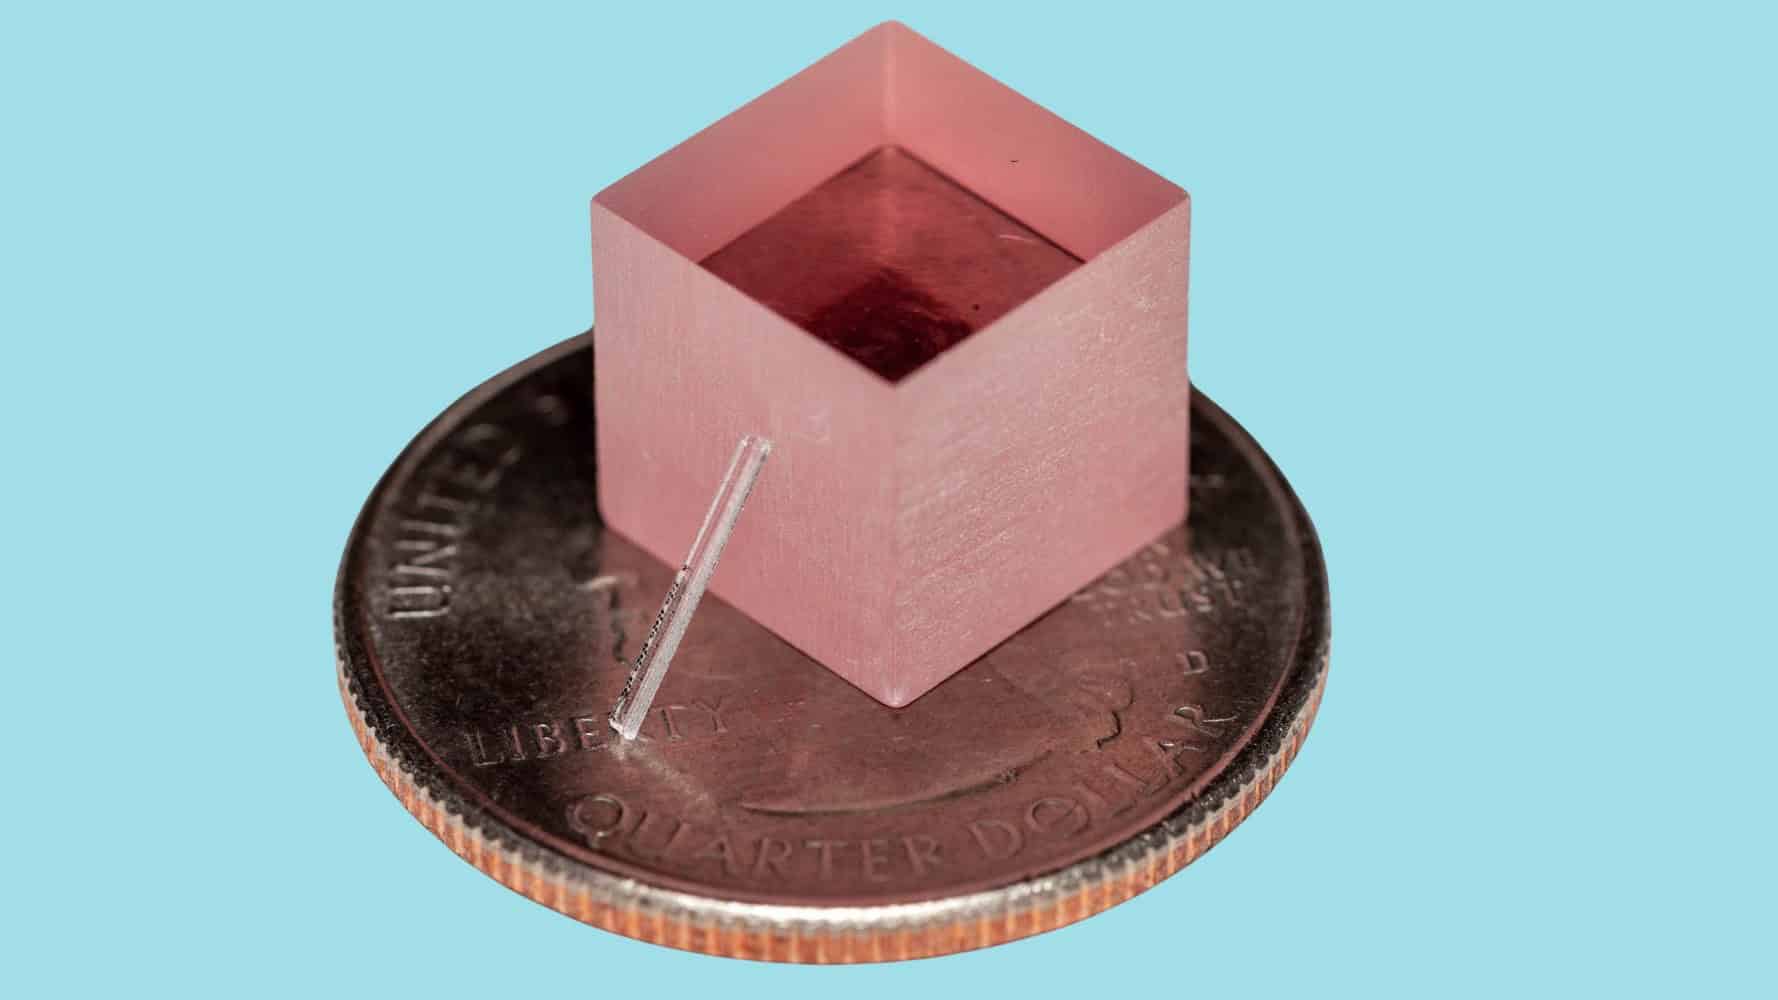 Physics World introduces a new small, affordable, and customizable titanium:sapphire laser